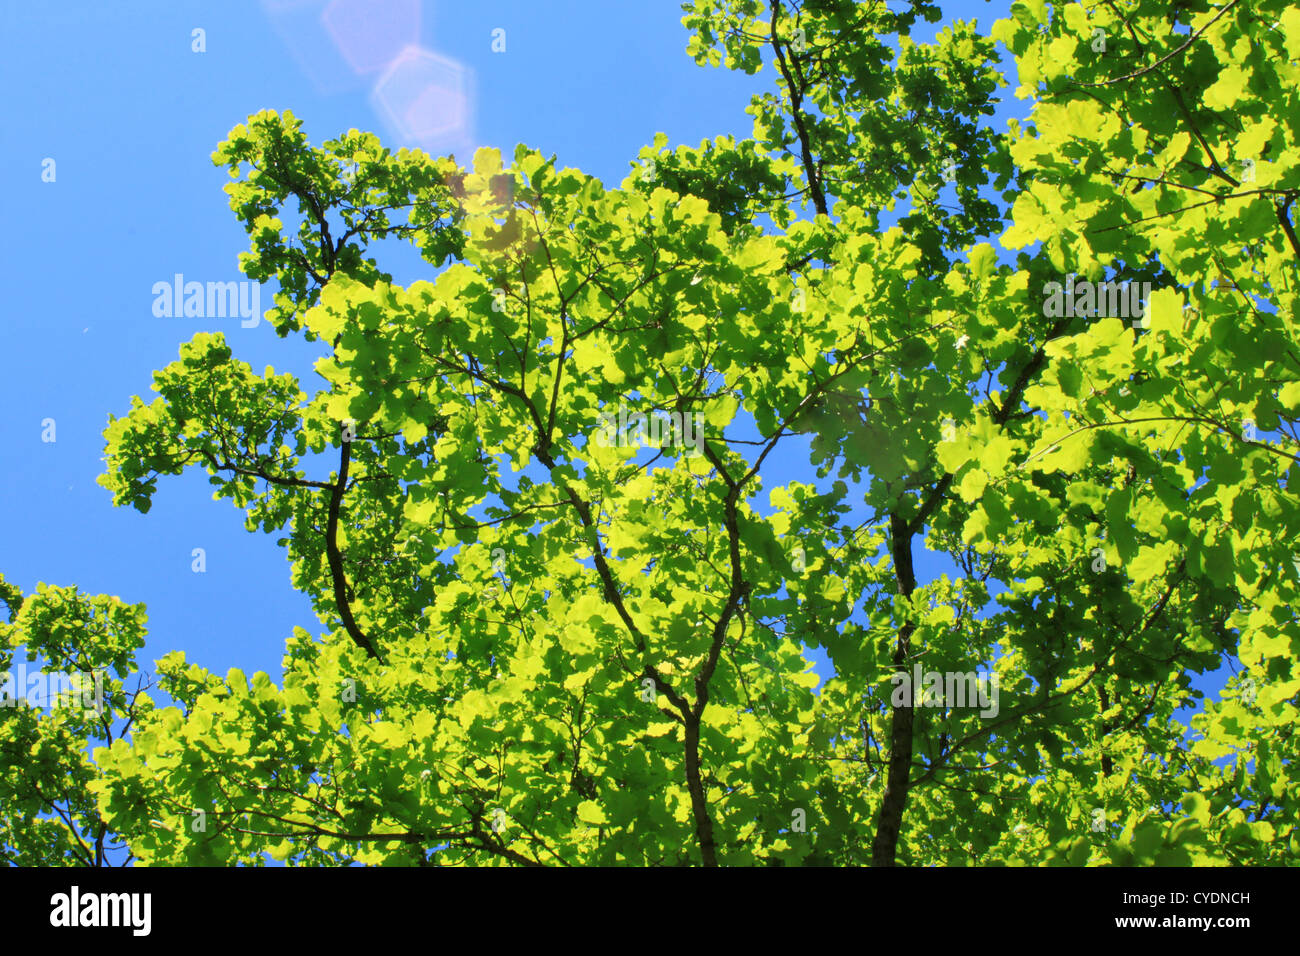 Bright green foliage against a background the blue sky Stock Photo